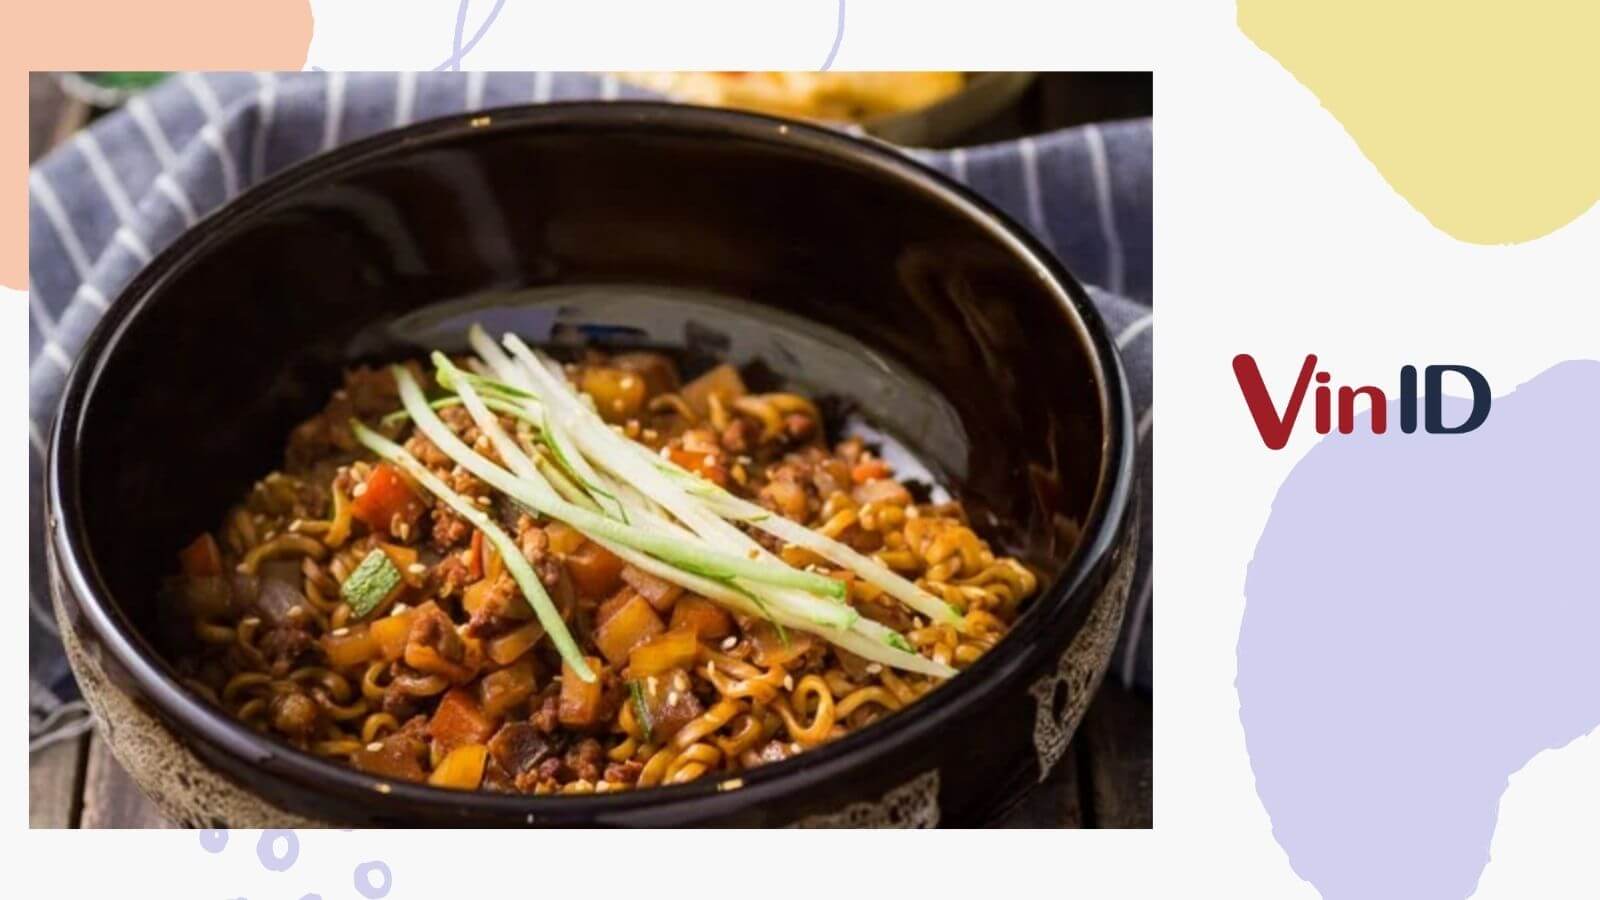 What are the steps to make black bean sauce for mixing with noodles?